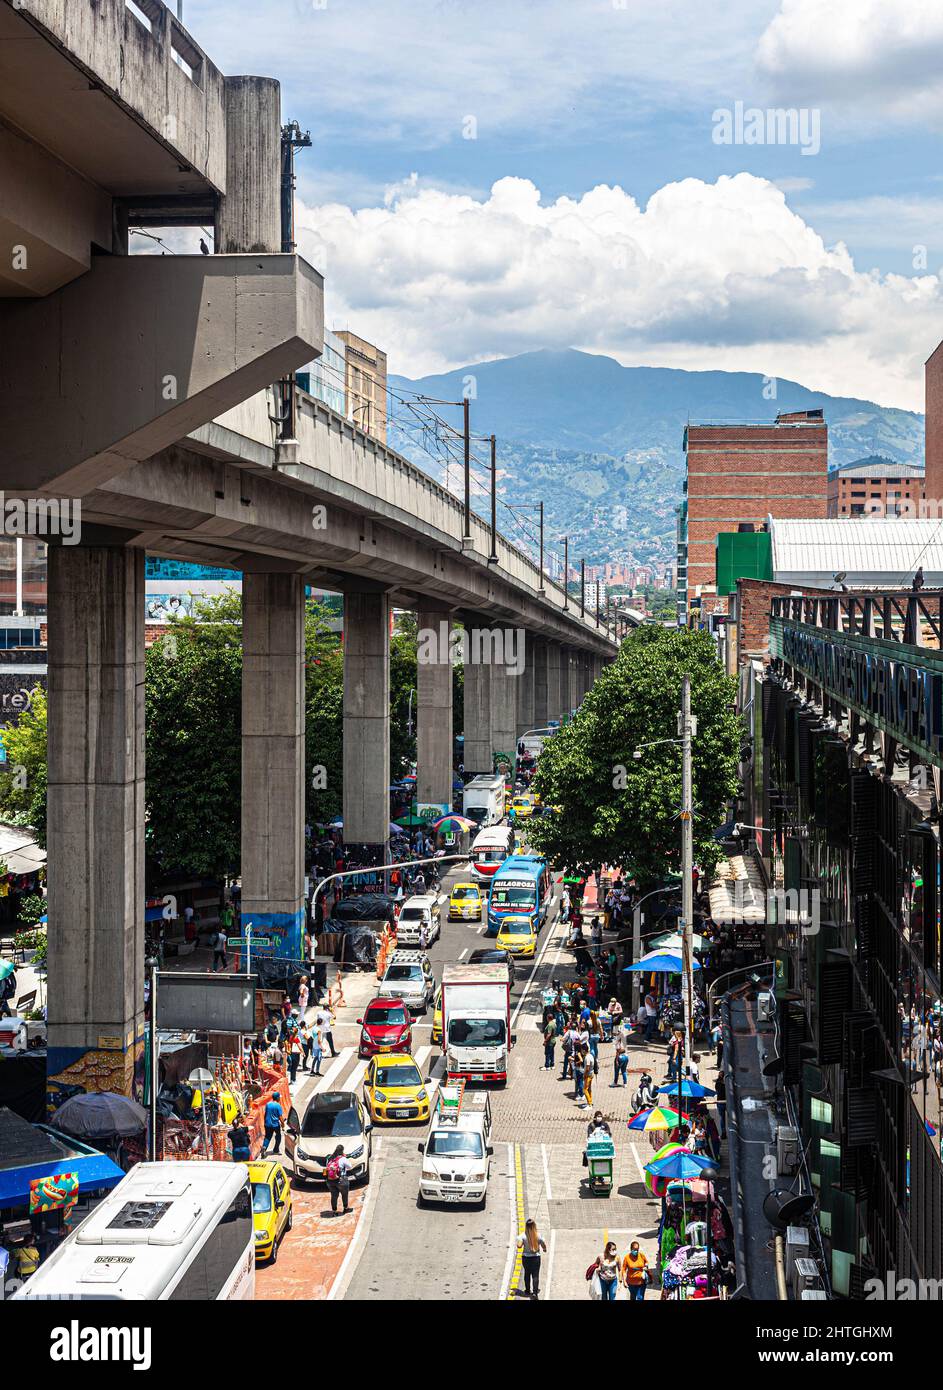 High angle view of vehicular traffic on a street in central Medellín, Colombia. Stock Photo